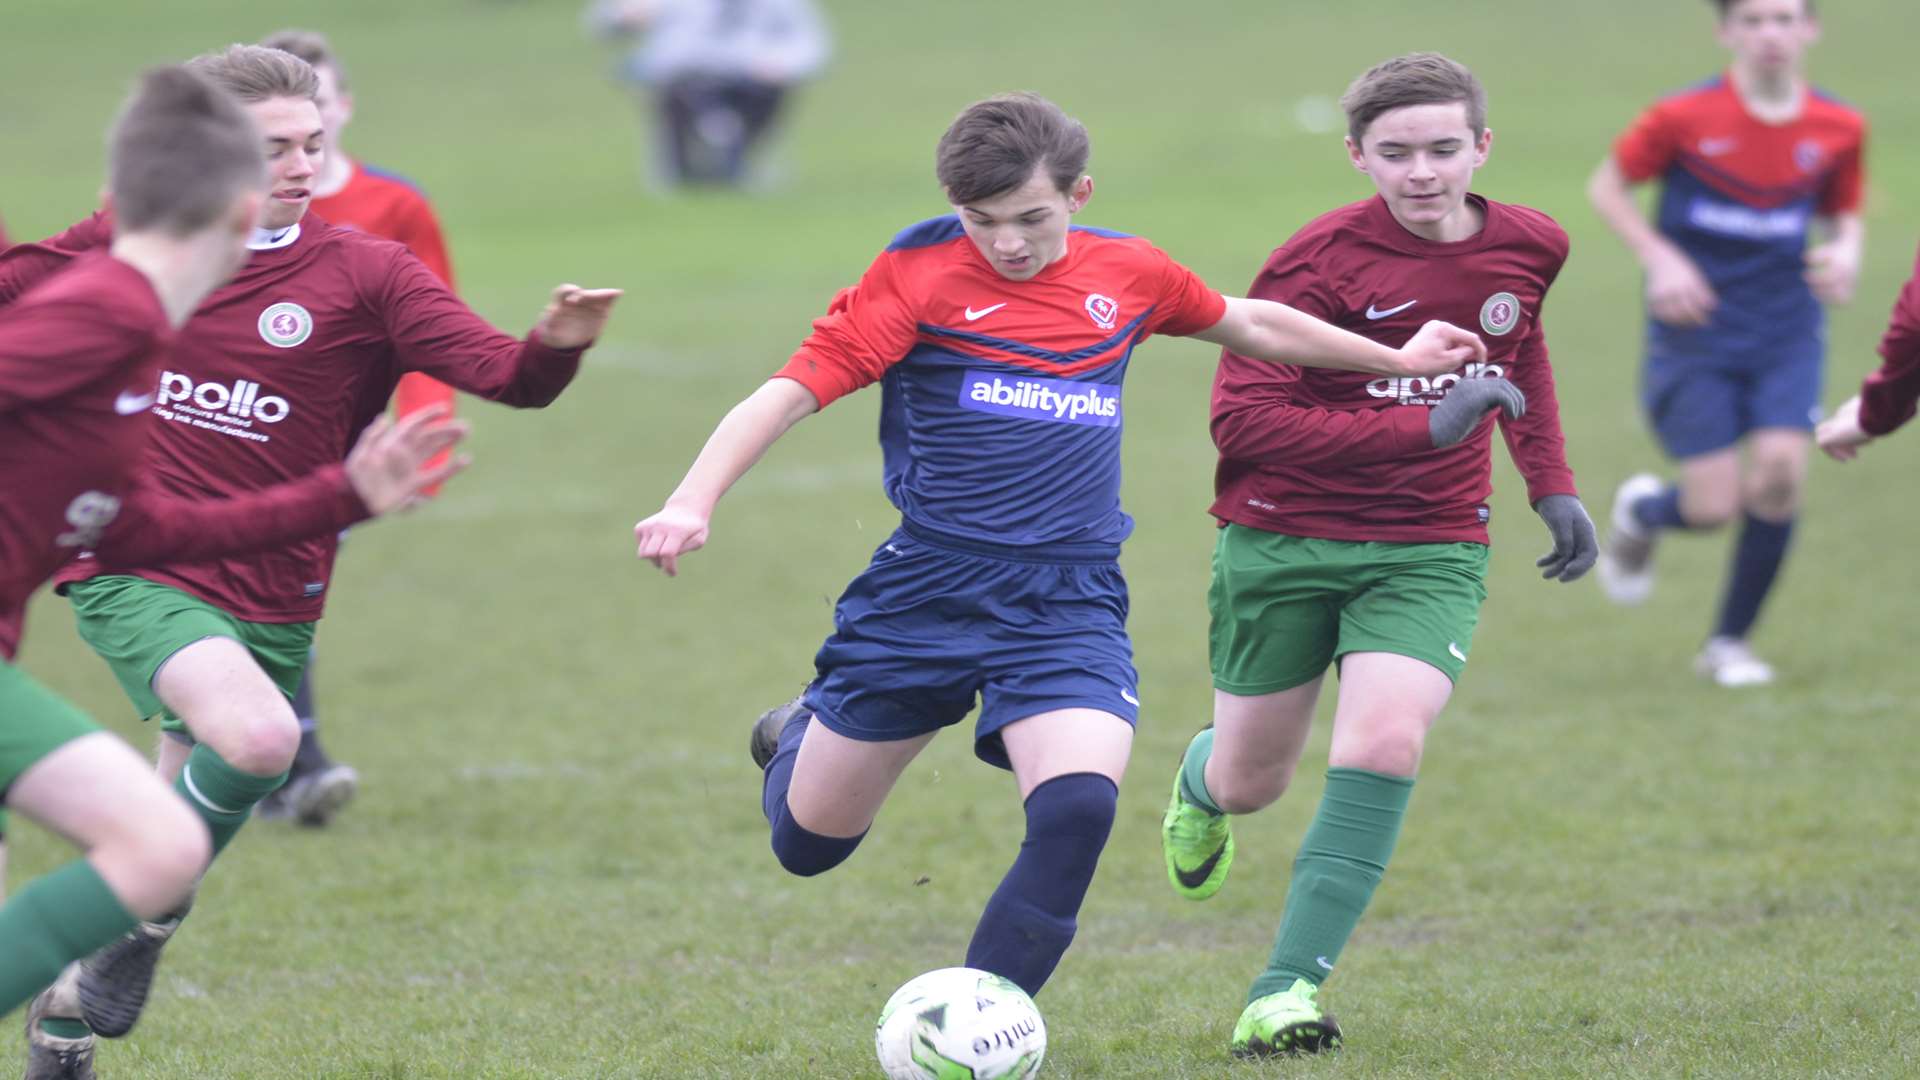 Hempstead Valley Colts (red and blue) up against Cobham Colts in Under-15 Division 1 Picture: Ruth Cuerden